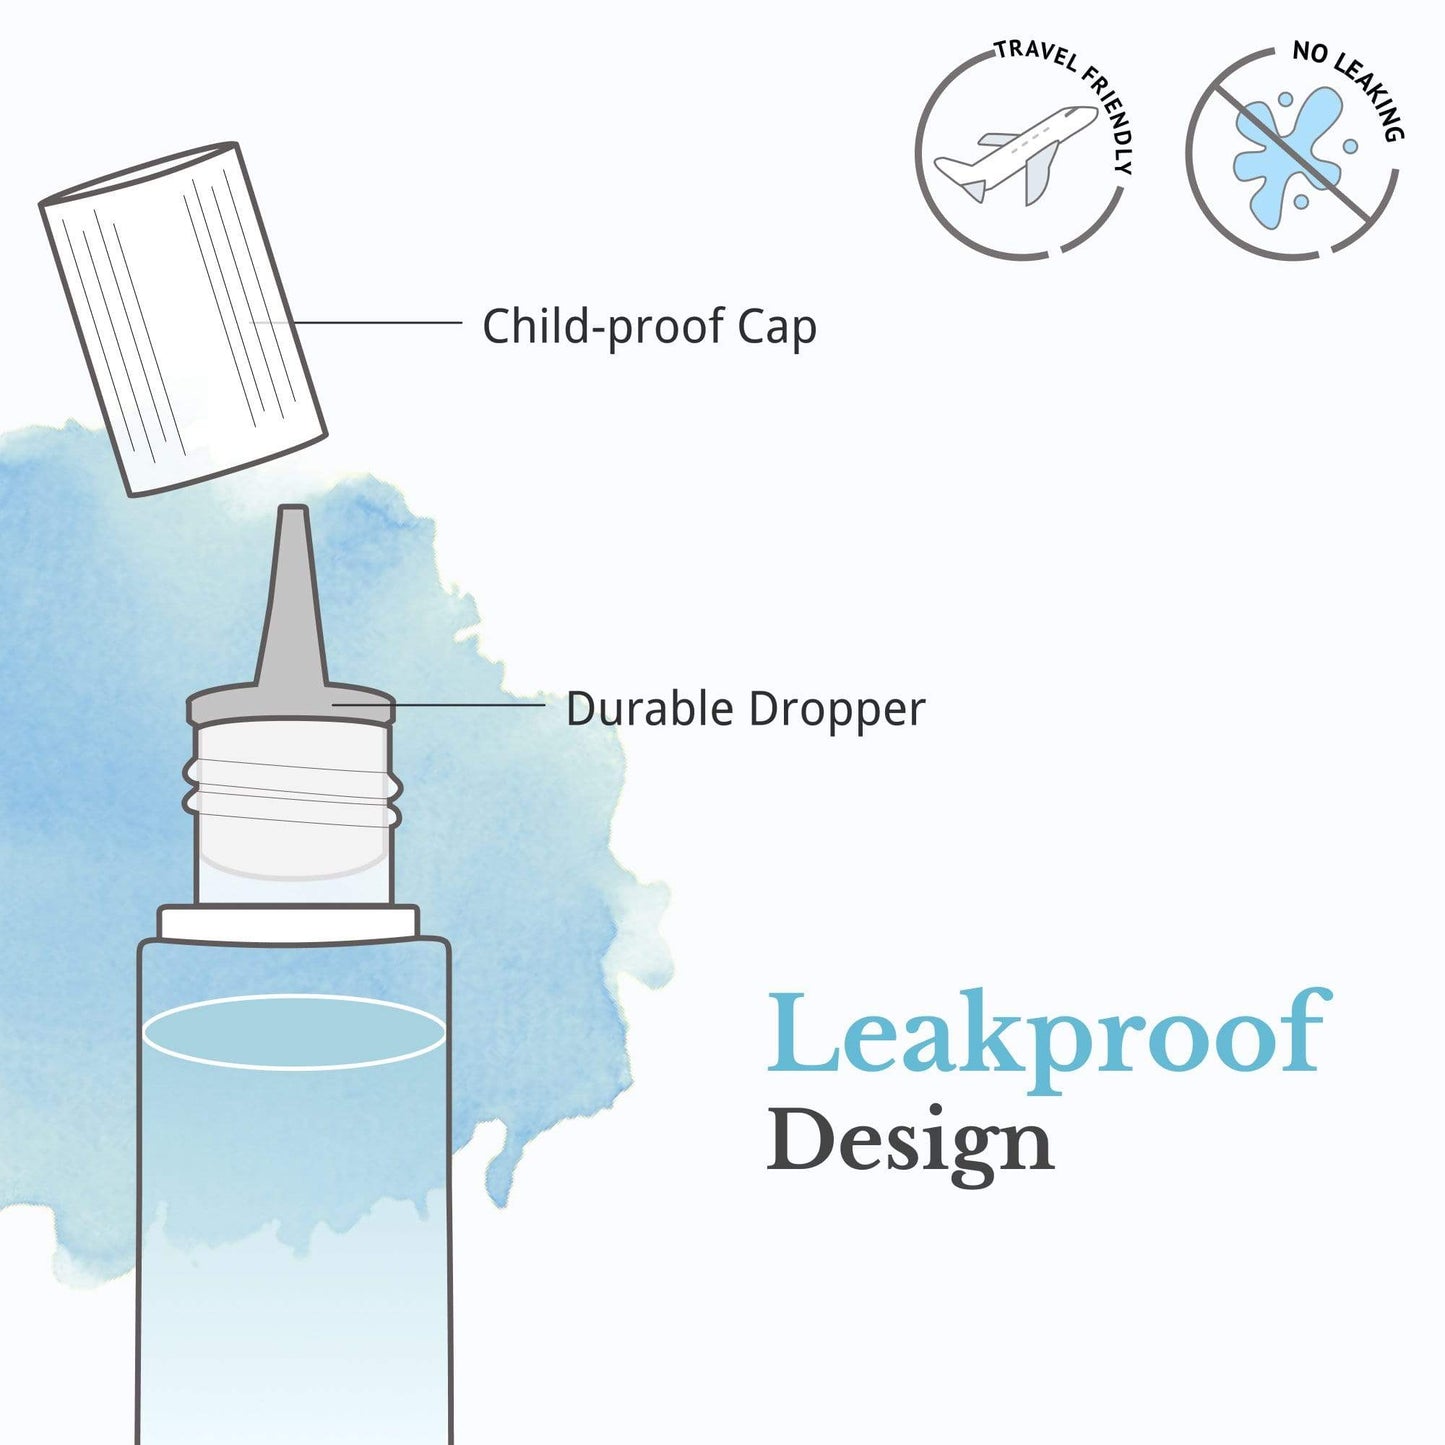 Leak proof design with child proof cap and durable dropper. Travel friendly